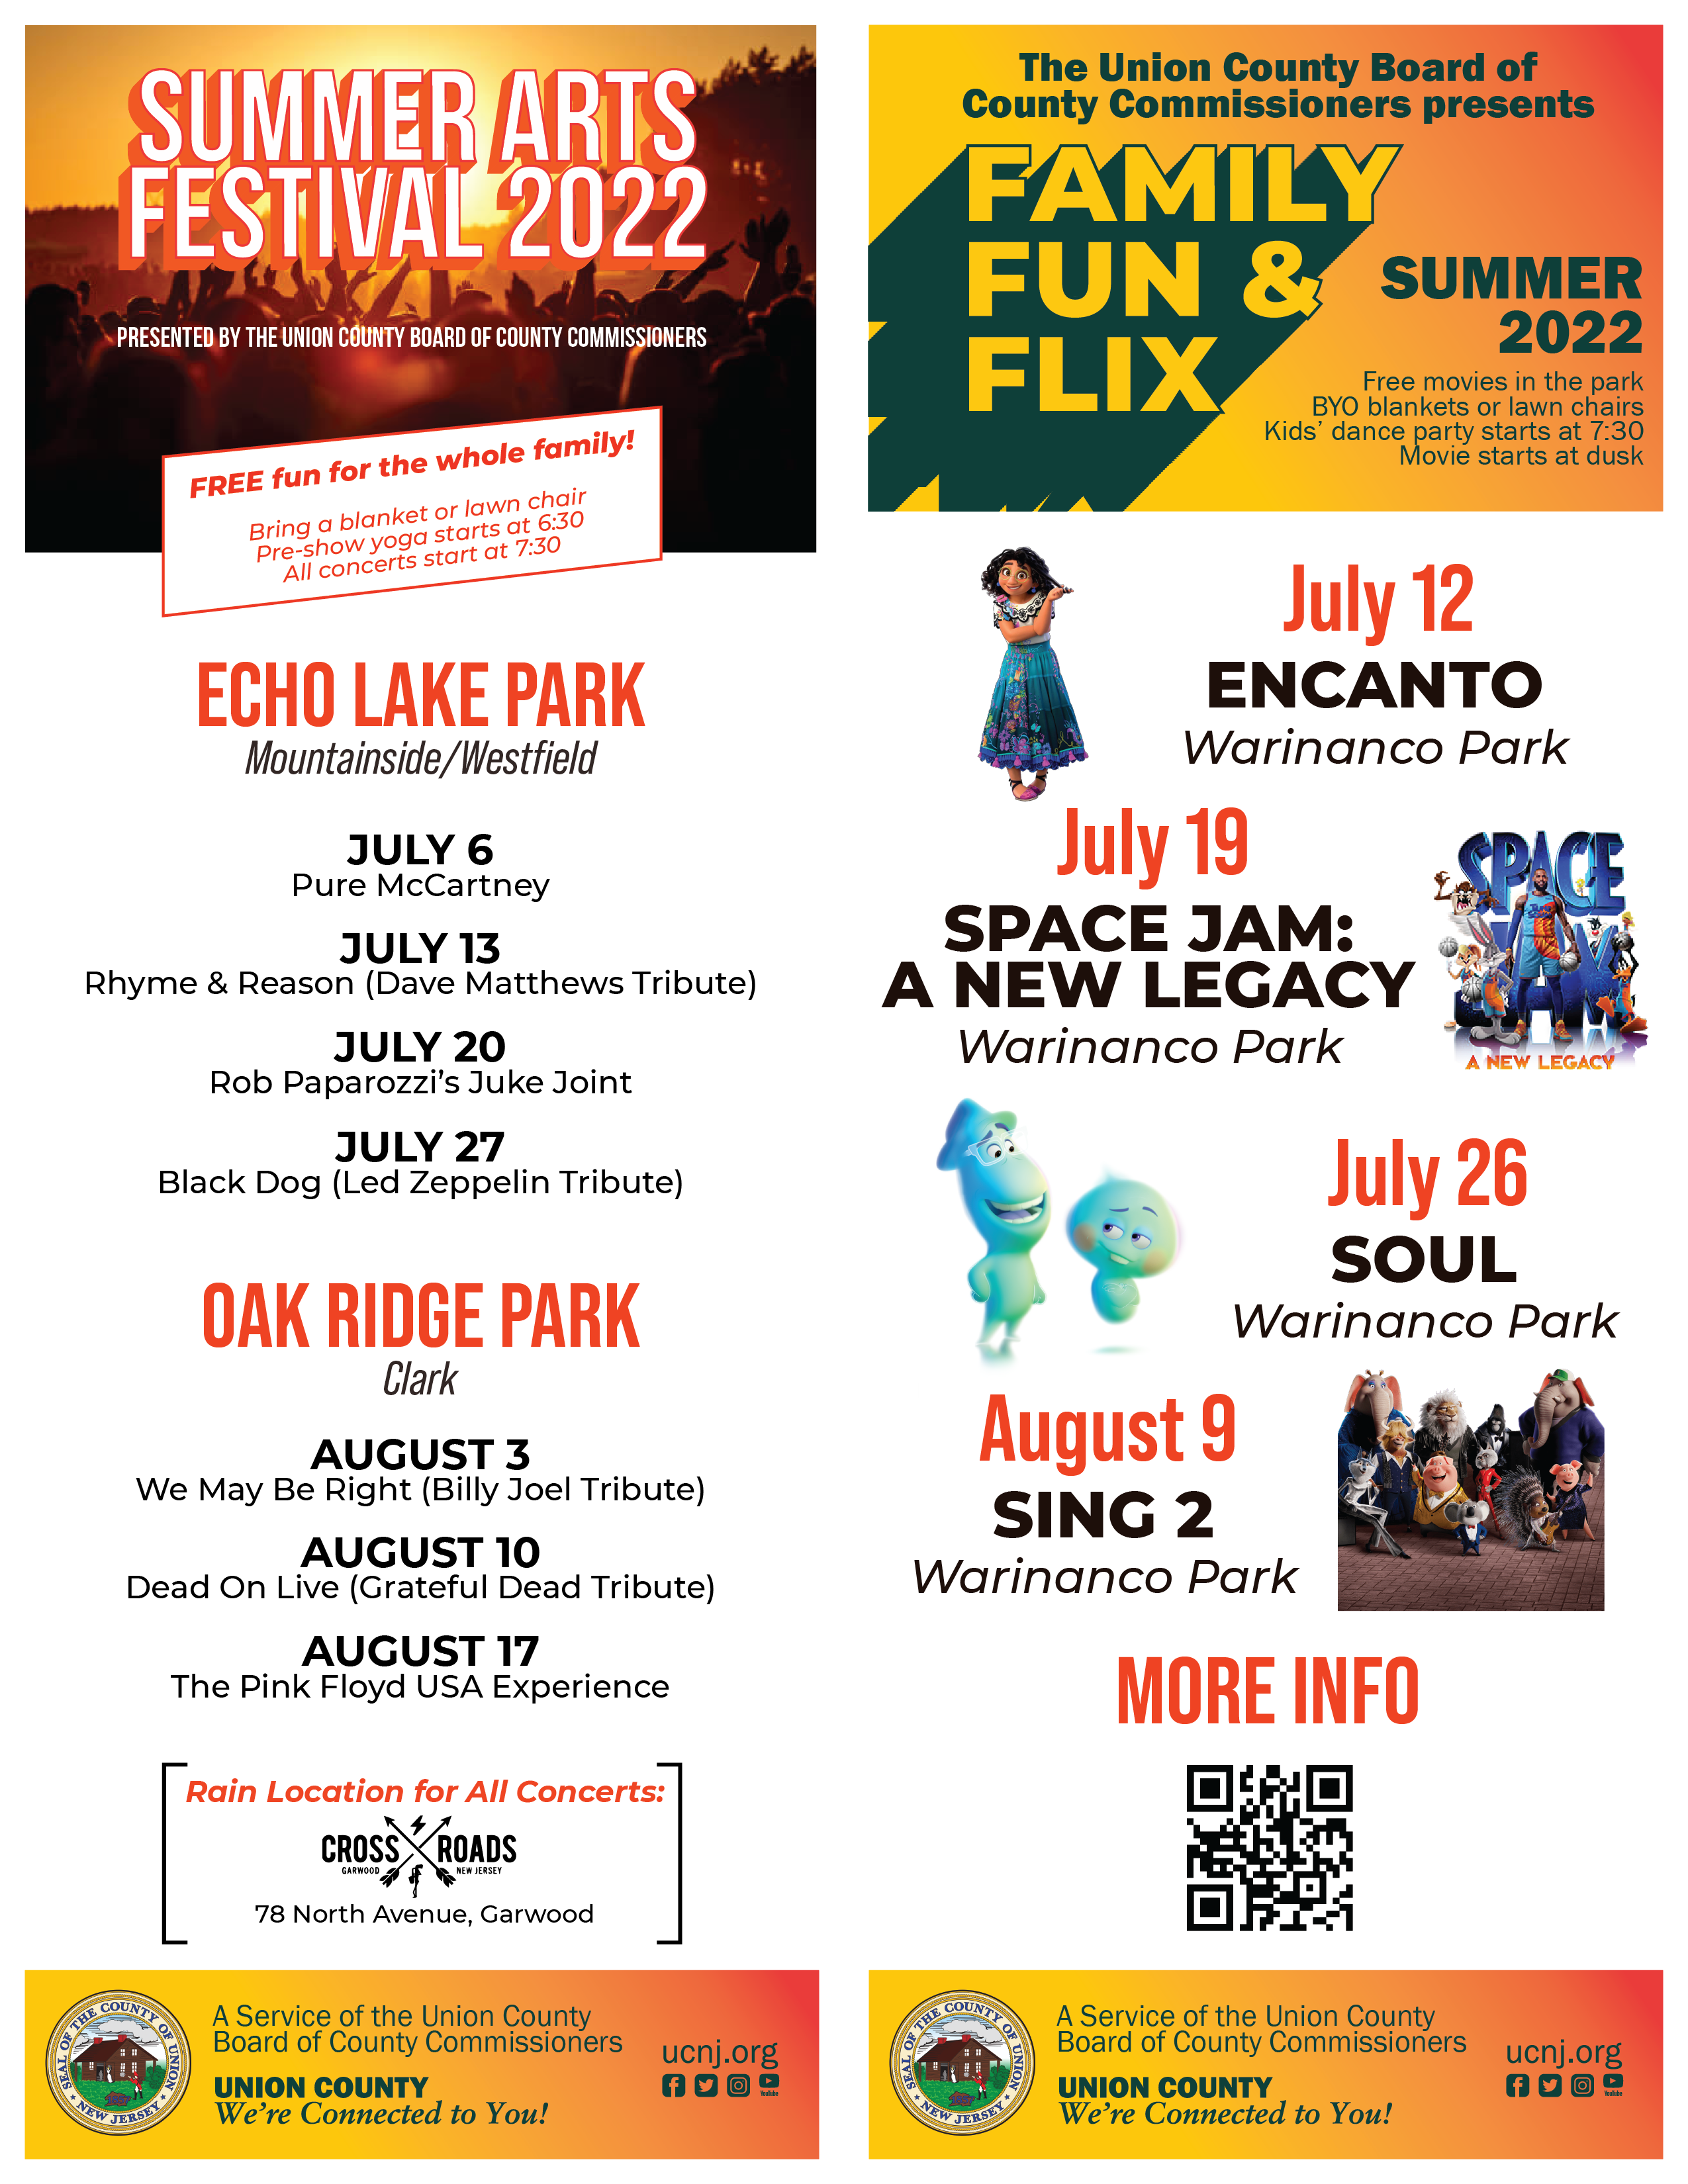 summer arts festival and family fun & flix flyers